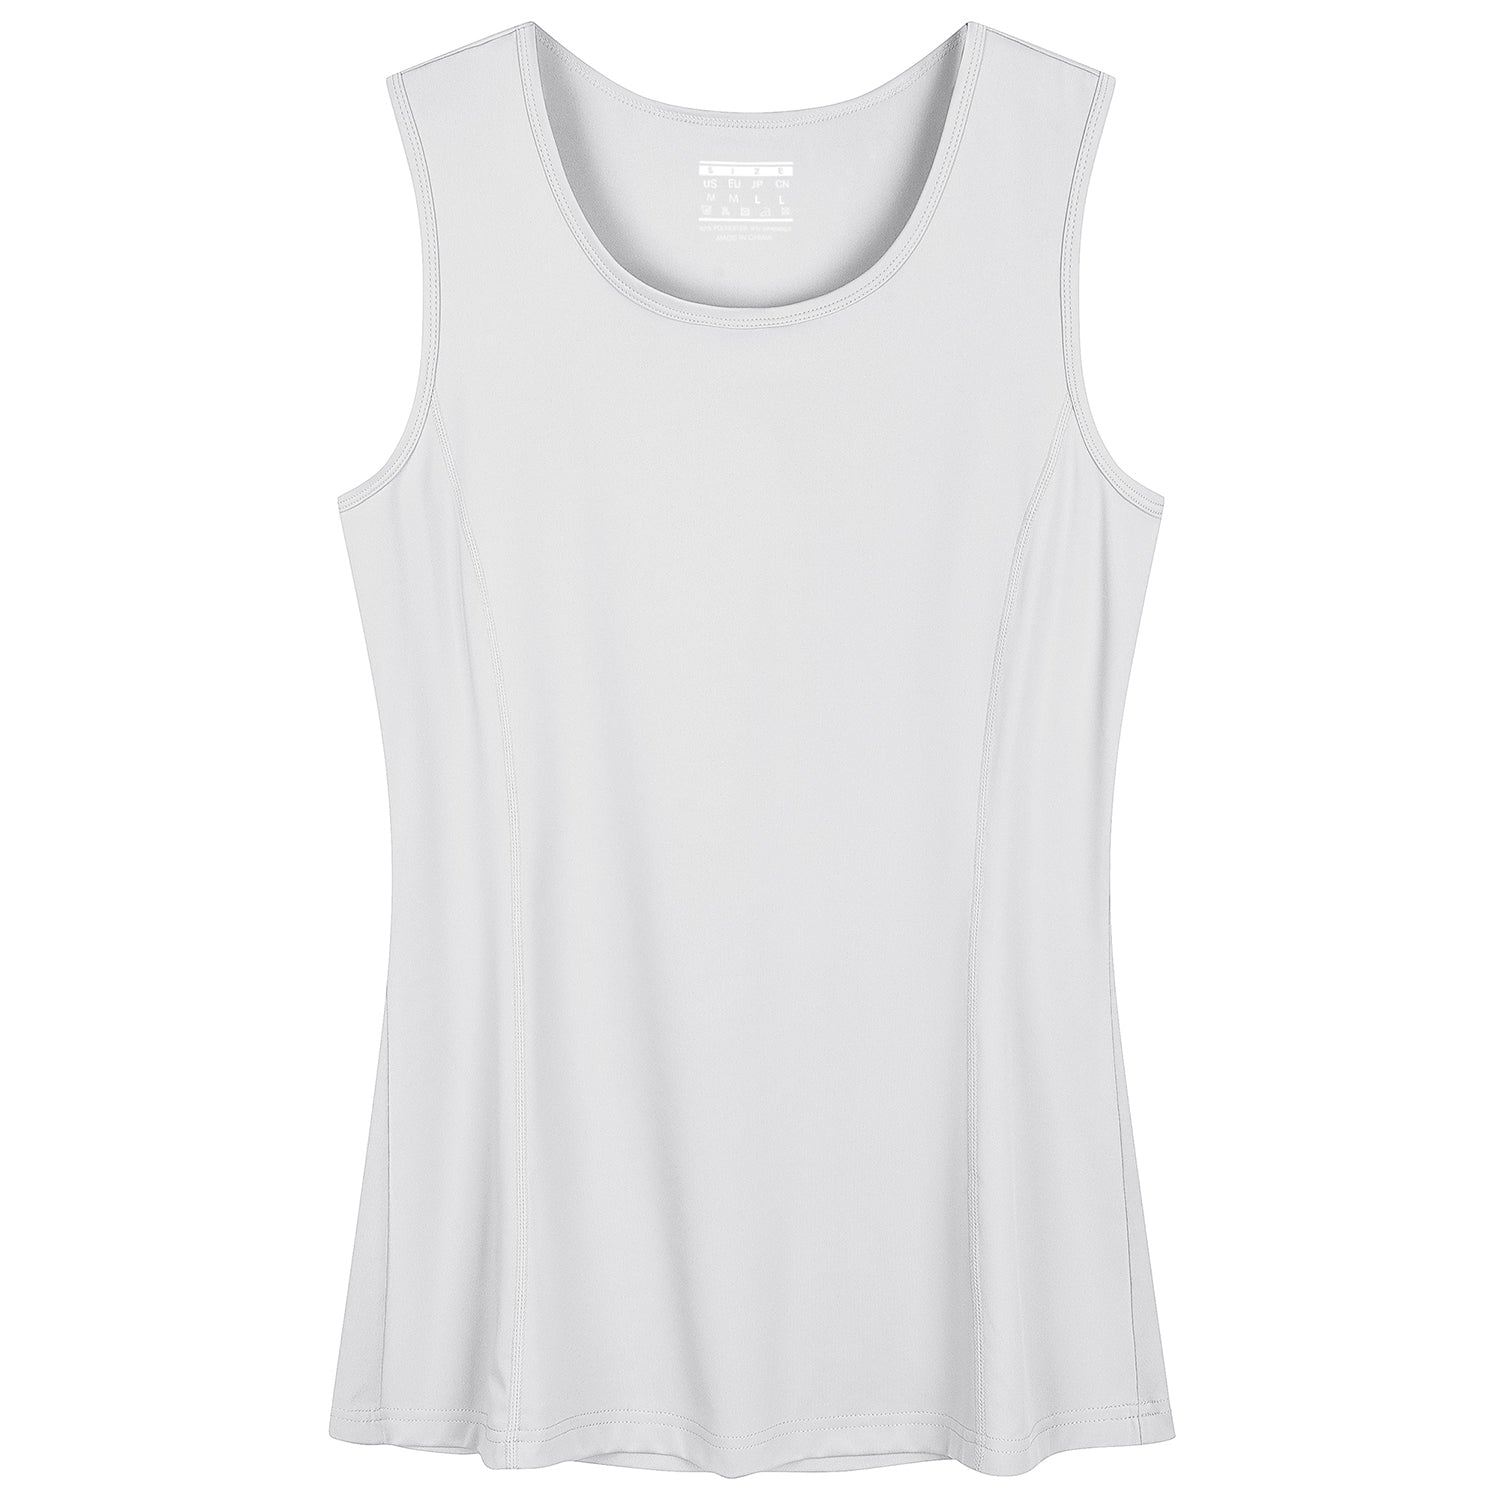 Women's Workout Shirts & Tops in White